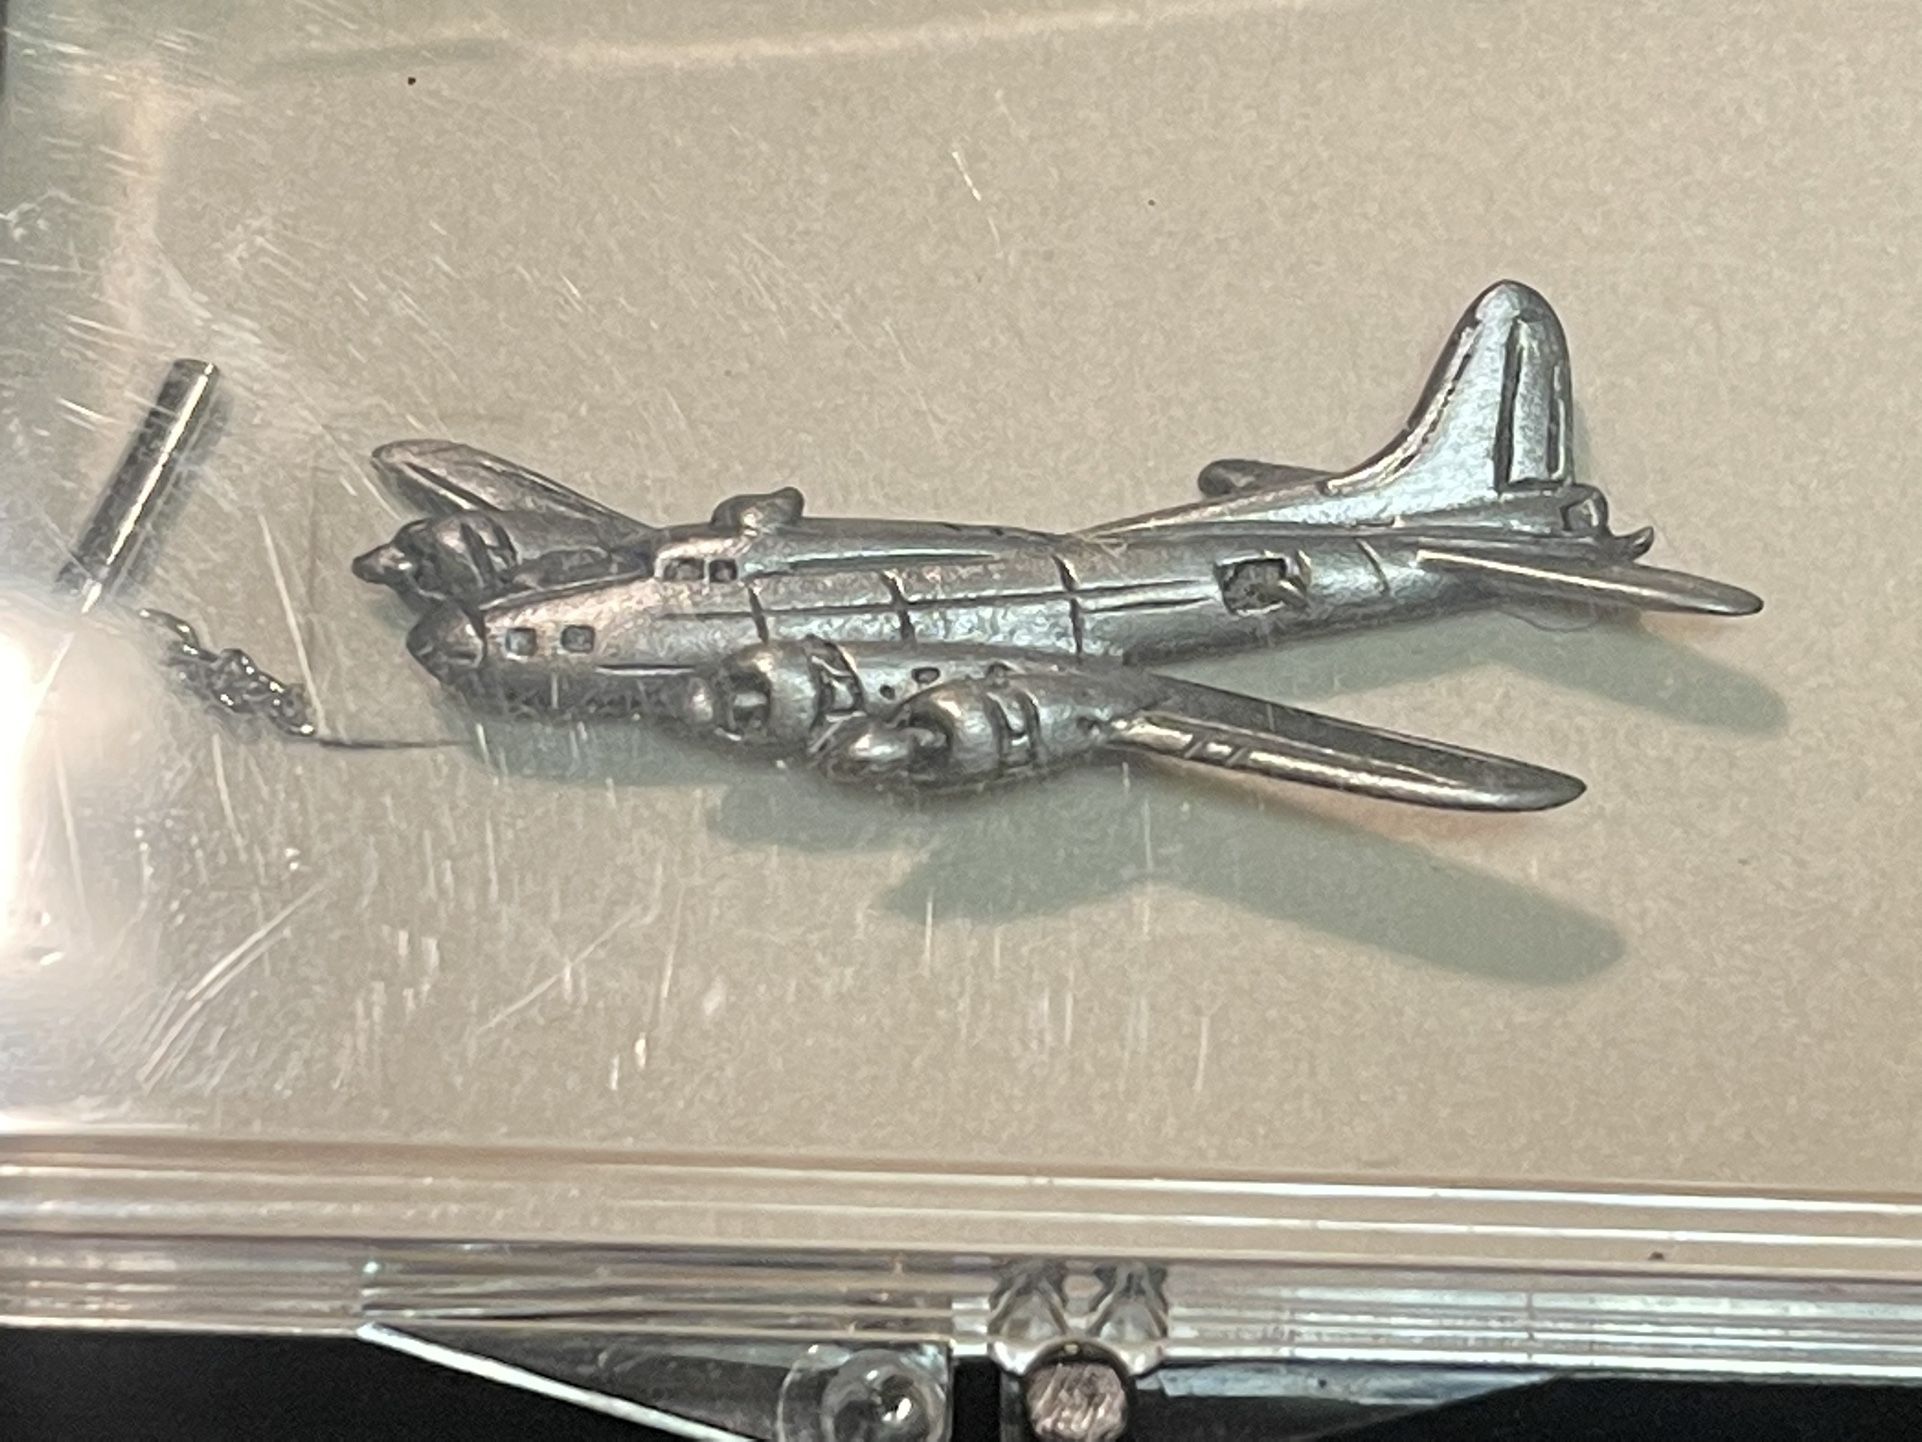 Boeing B-17 Flying Fortress, Bomber, Aircraft Pin, And Other Military Pins